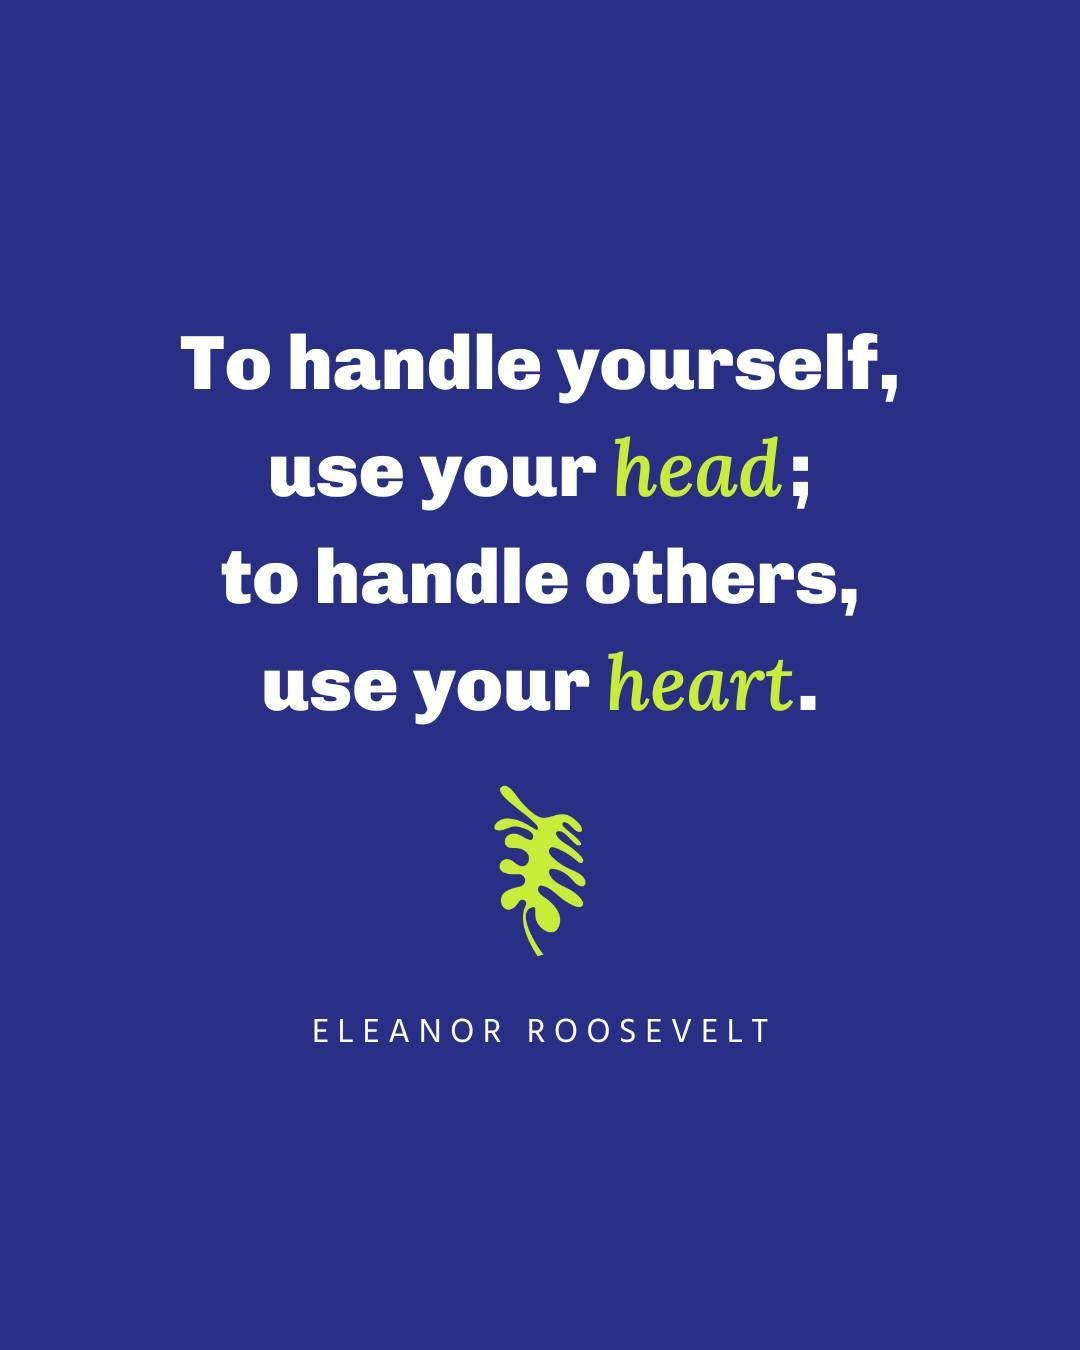 We think this quote beautifully captures the essence of HR management!⁠
⁠
Finding that balance between logical thinking and empathy is the key to making informed decisions and fostering a supportive workplace environment 💫⁠
⁠
&bull;⁠
&bull;⁠
&bull;⁠